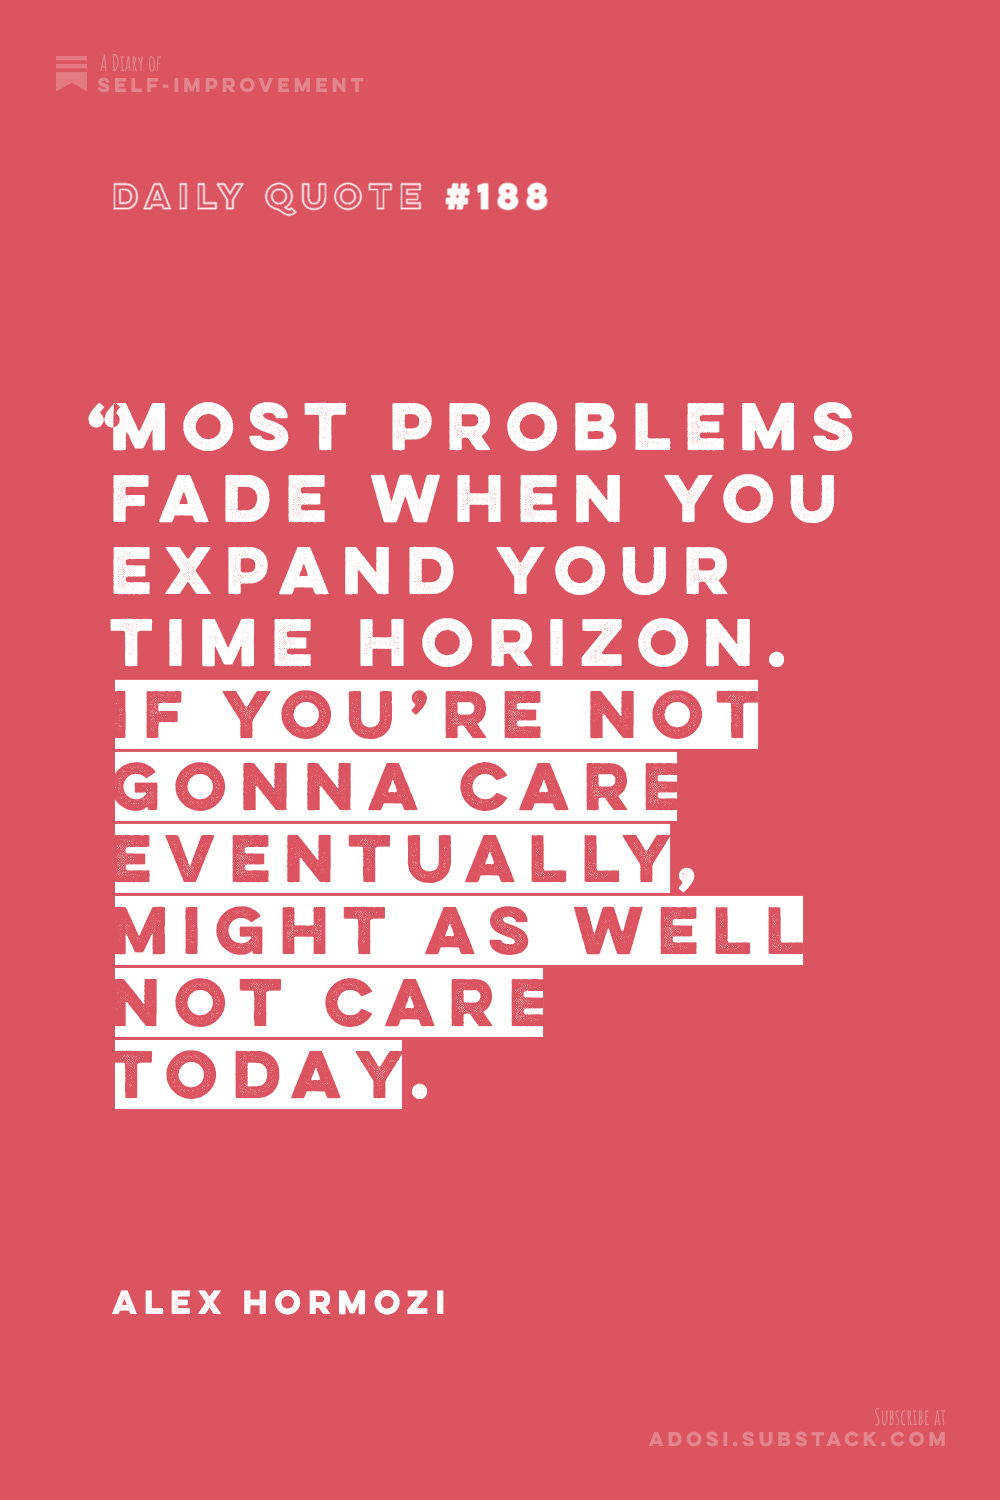 Daily Quote #188: “Most problems fade when you expand your time horizon. If you’re not gonna care eventually, might as well not care today.” Alex Hormozi